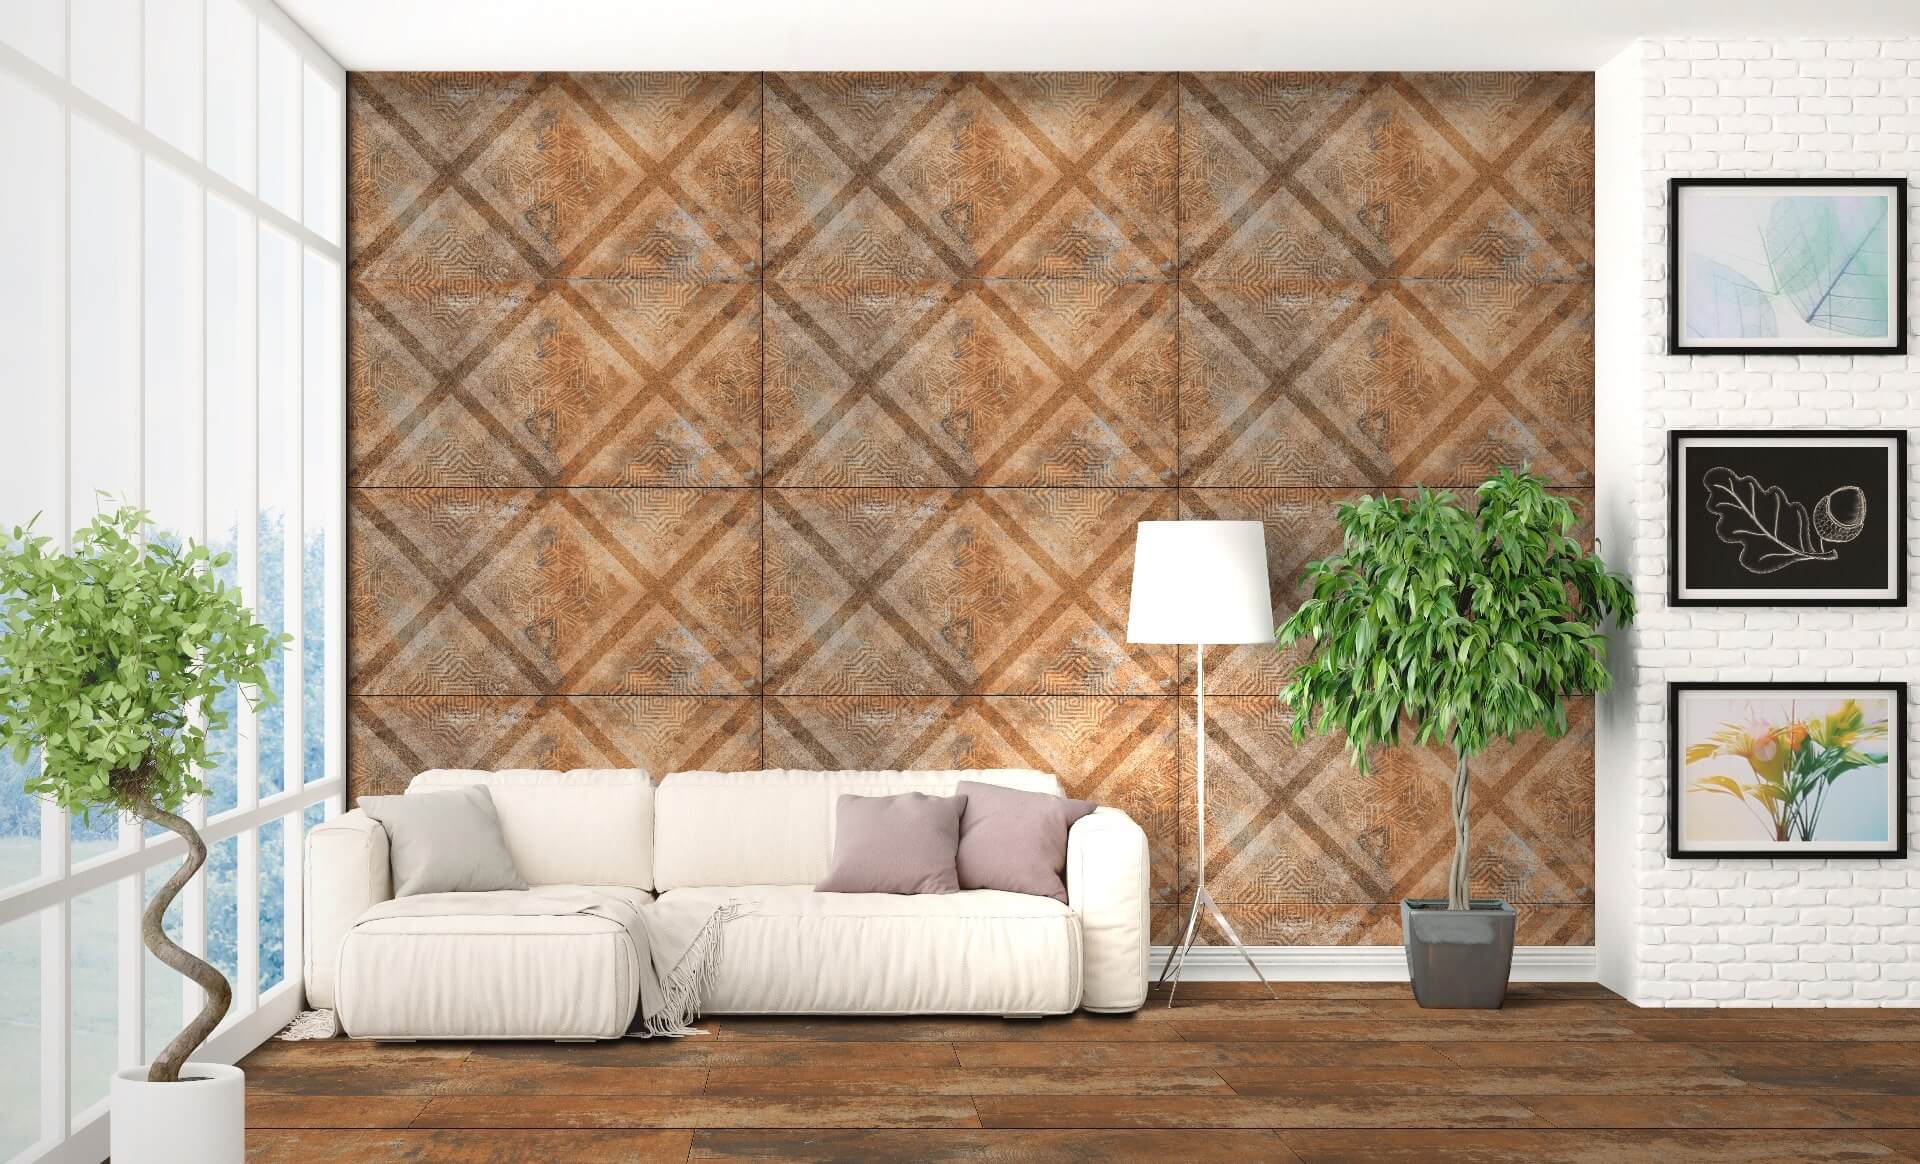 Stylized Tiles for Accent Tiles